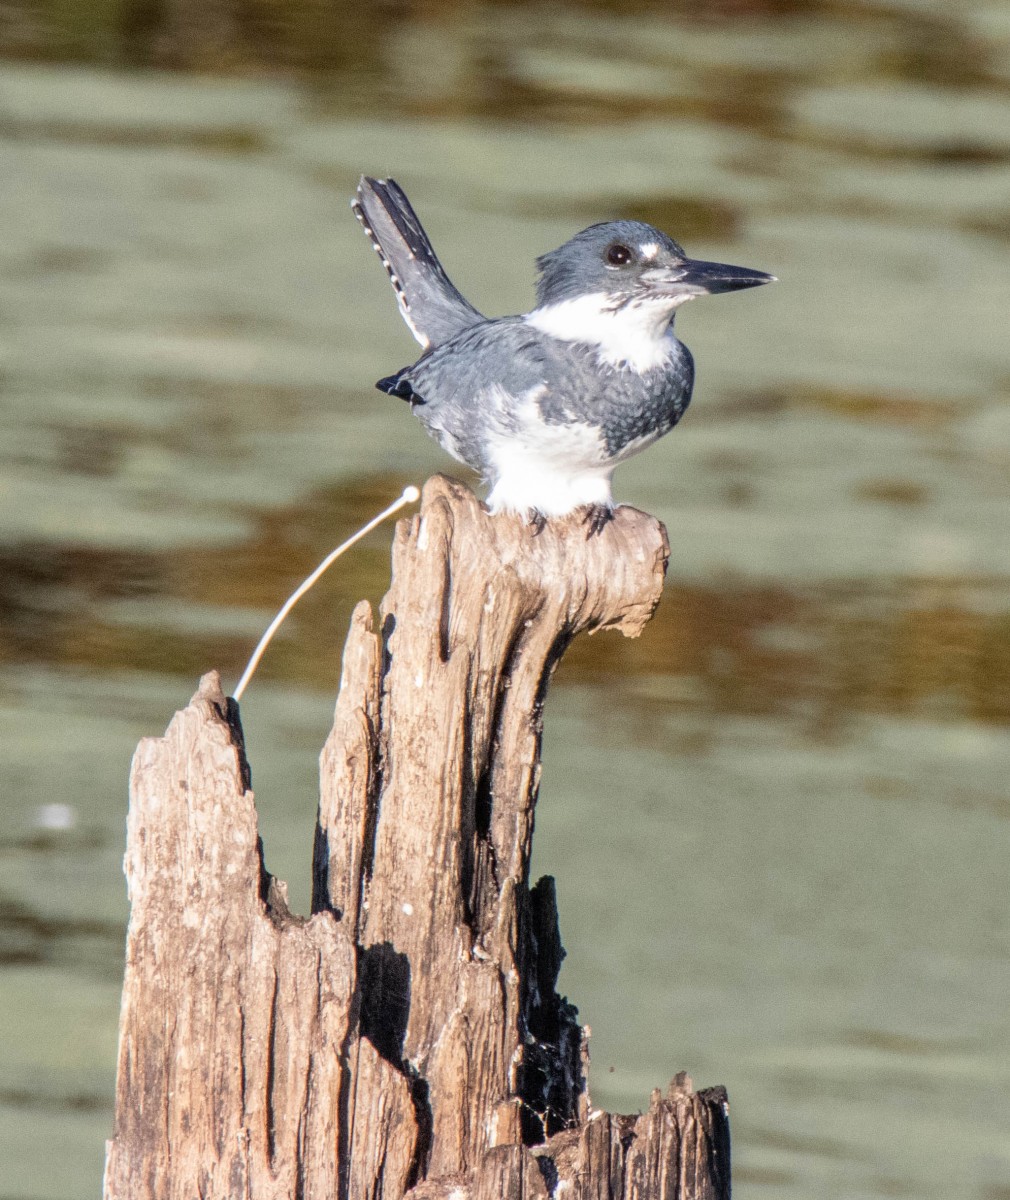 Male Belted Kingfisher, perched on a rotting wooden post, poops.